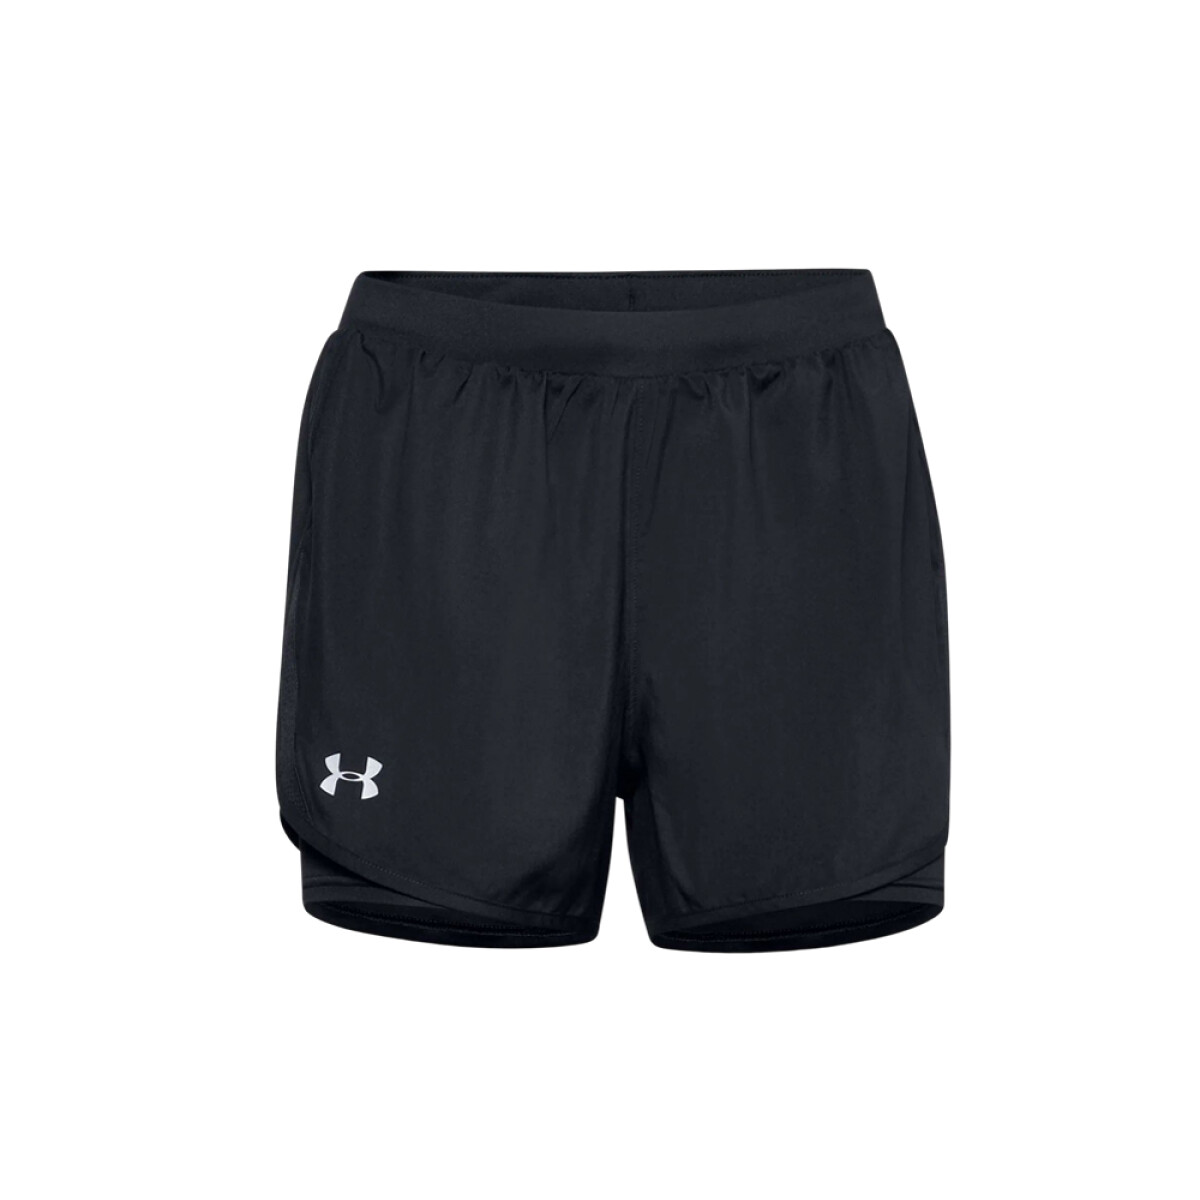 SHORT UNDER ARMOUR FLY BY 2.0 2N1 - Black 